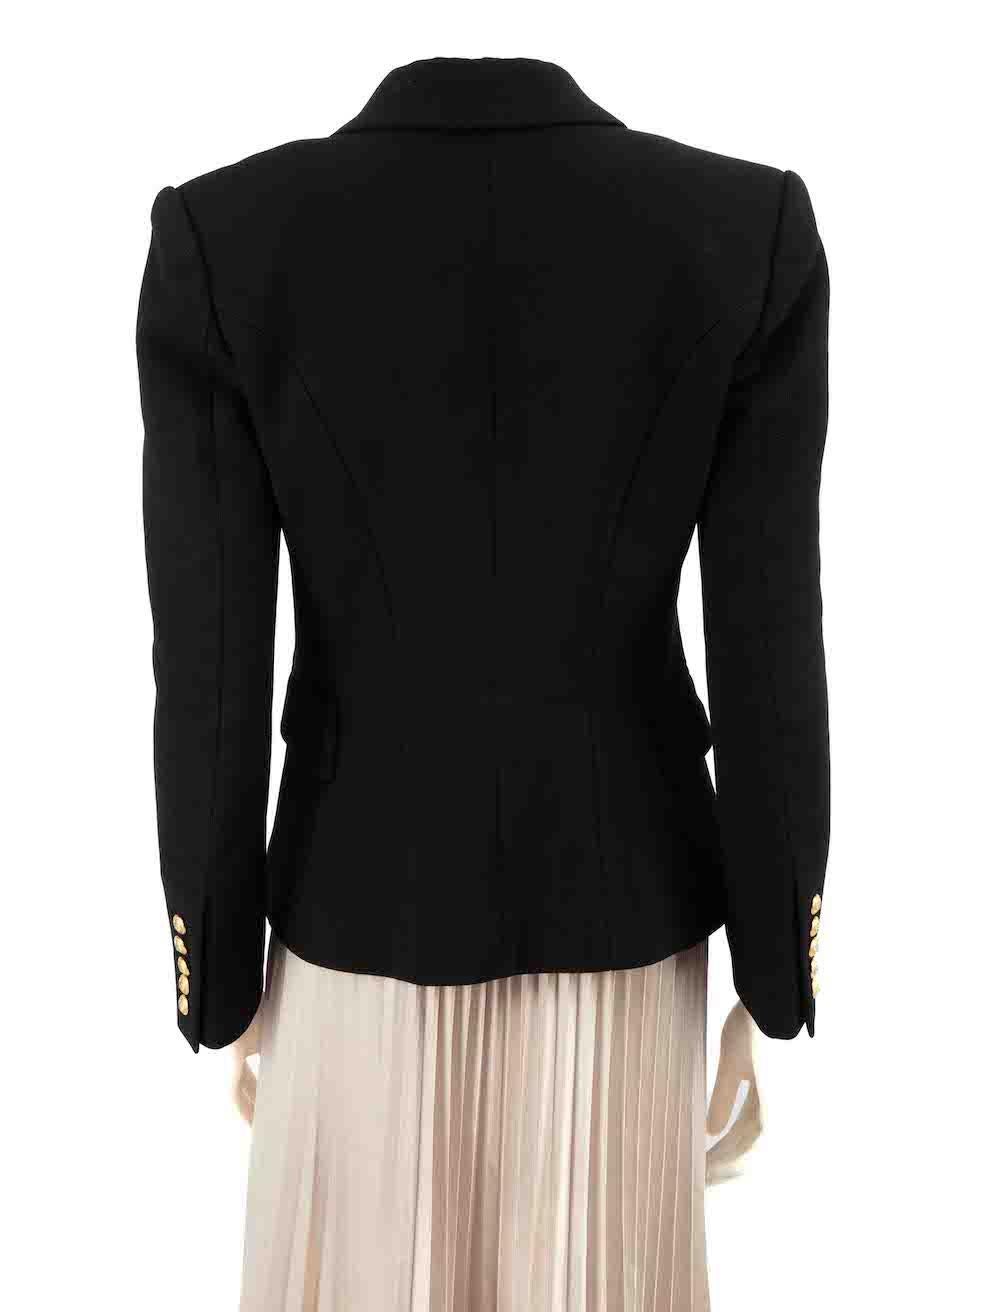 Balmain Black Double Breasted Blazer Size M In New Condition For Sale In London, GB